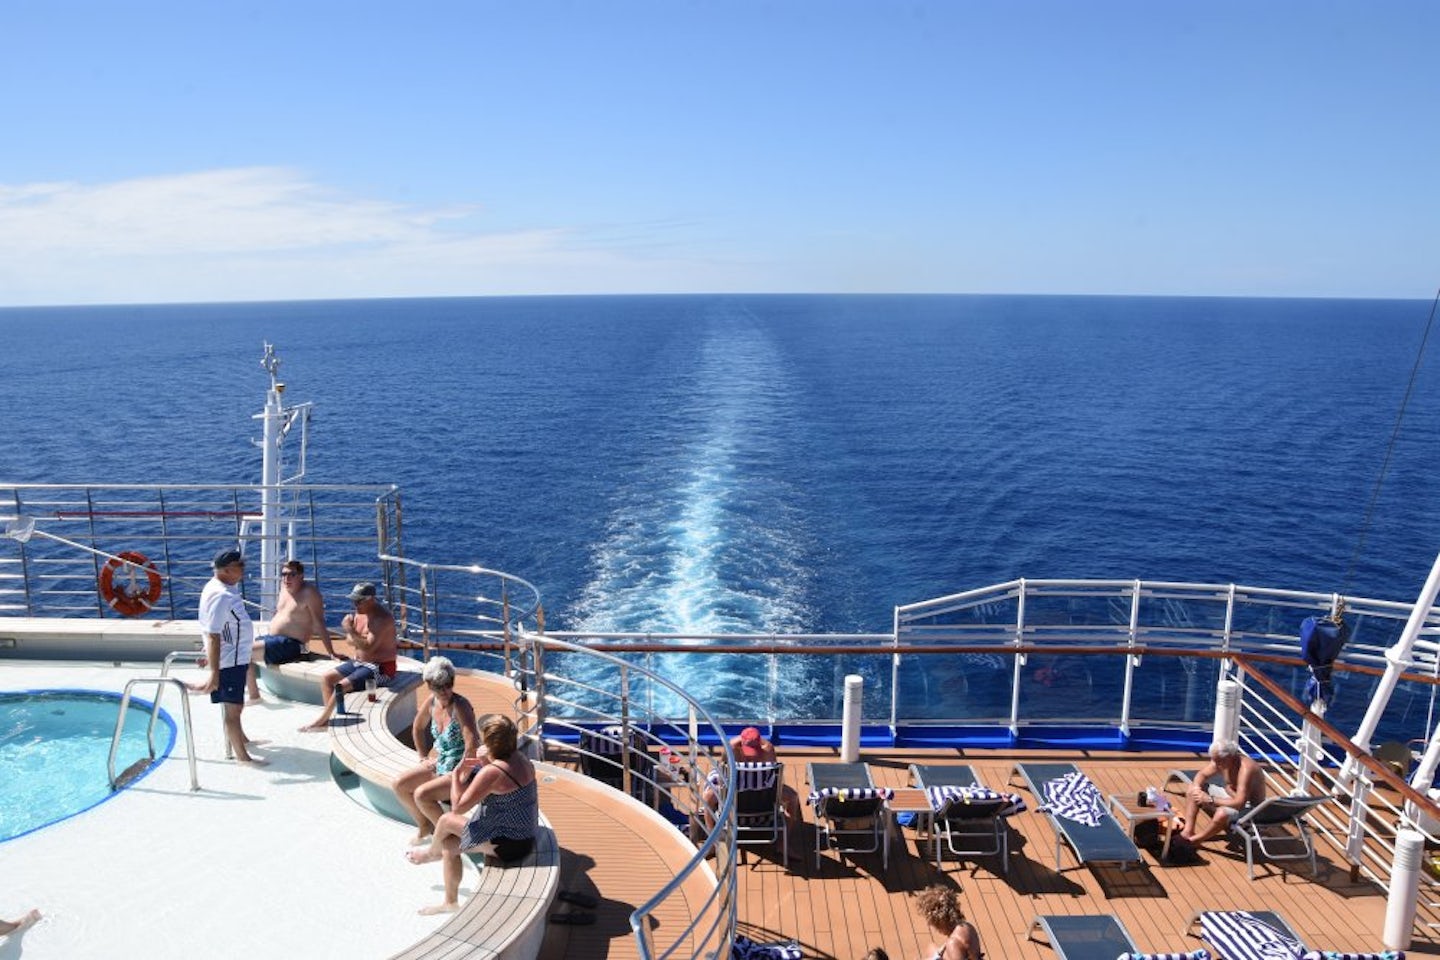 Afterdeck of the Regal Princess.